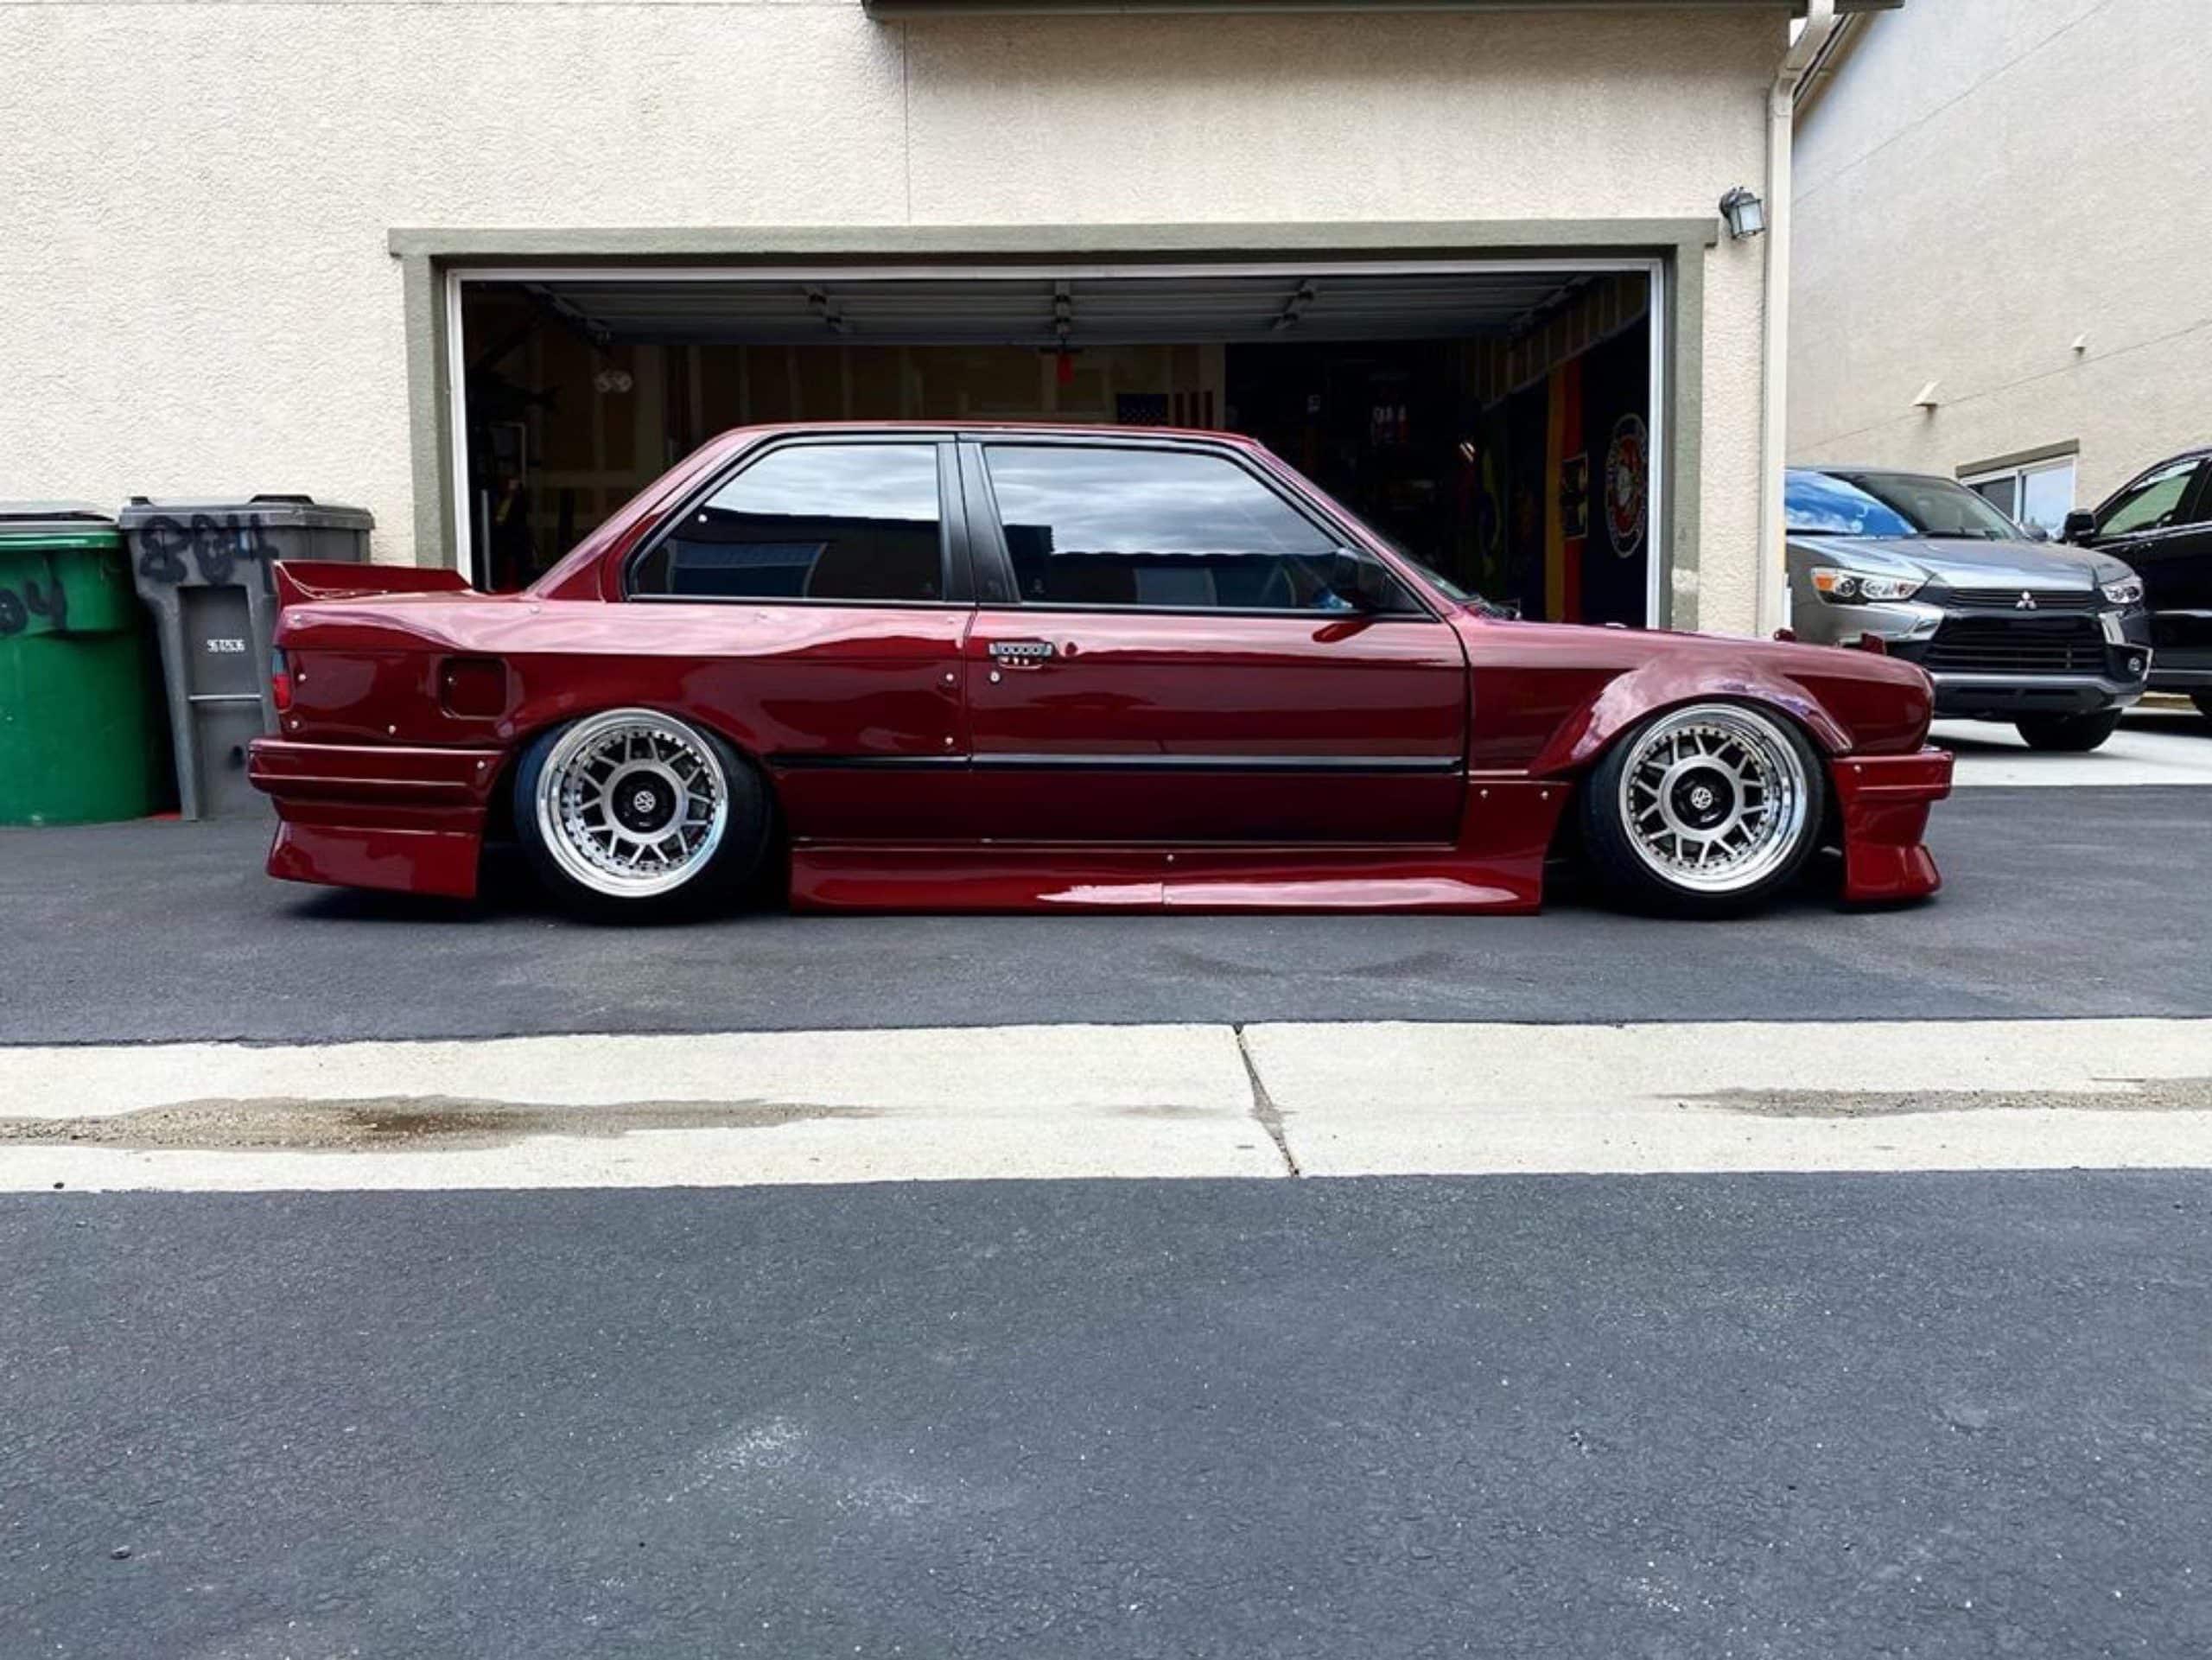 https://cliqtuning.com/wp-content/uploads/2019/08/bmw-e30-coupe-overfenders-front-and-rear-drift-stance-cliqtuning1-scaled.jpg